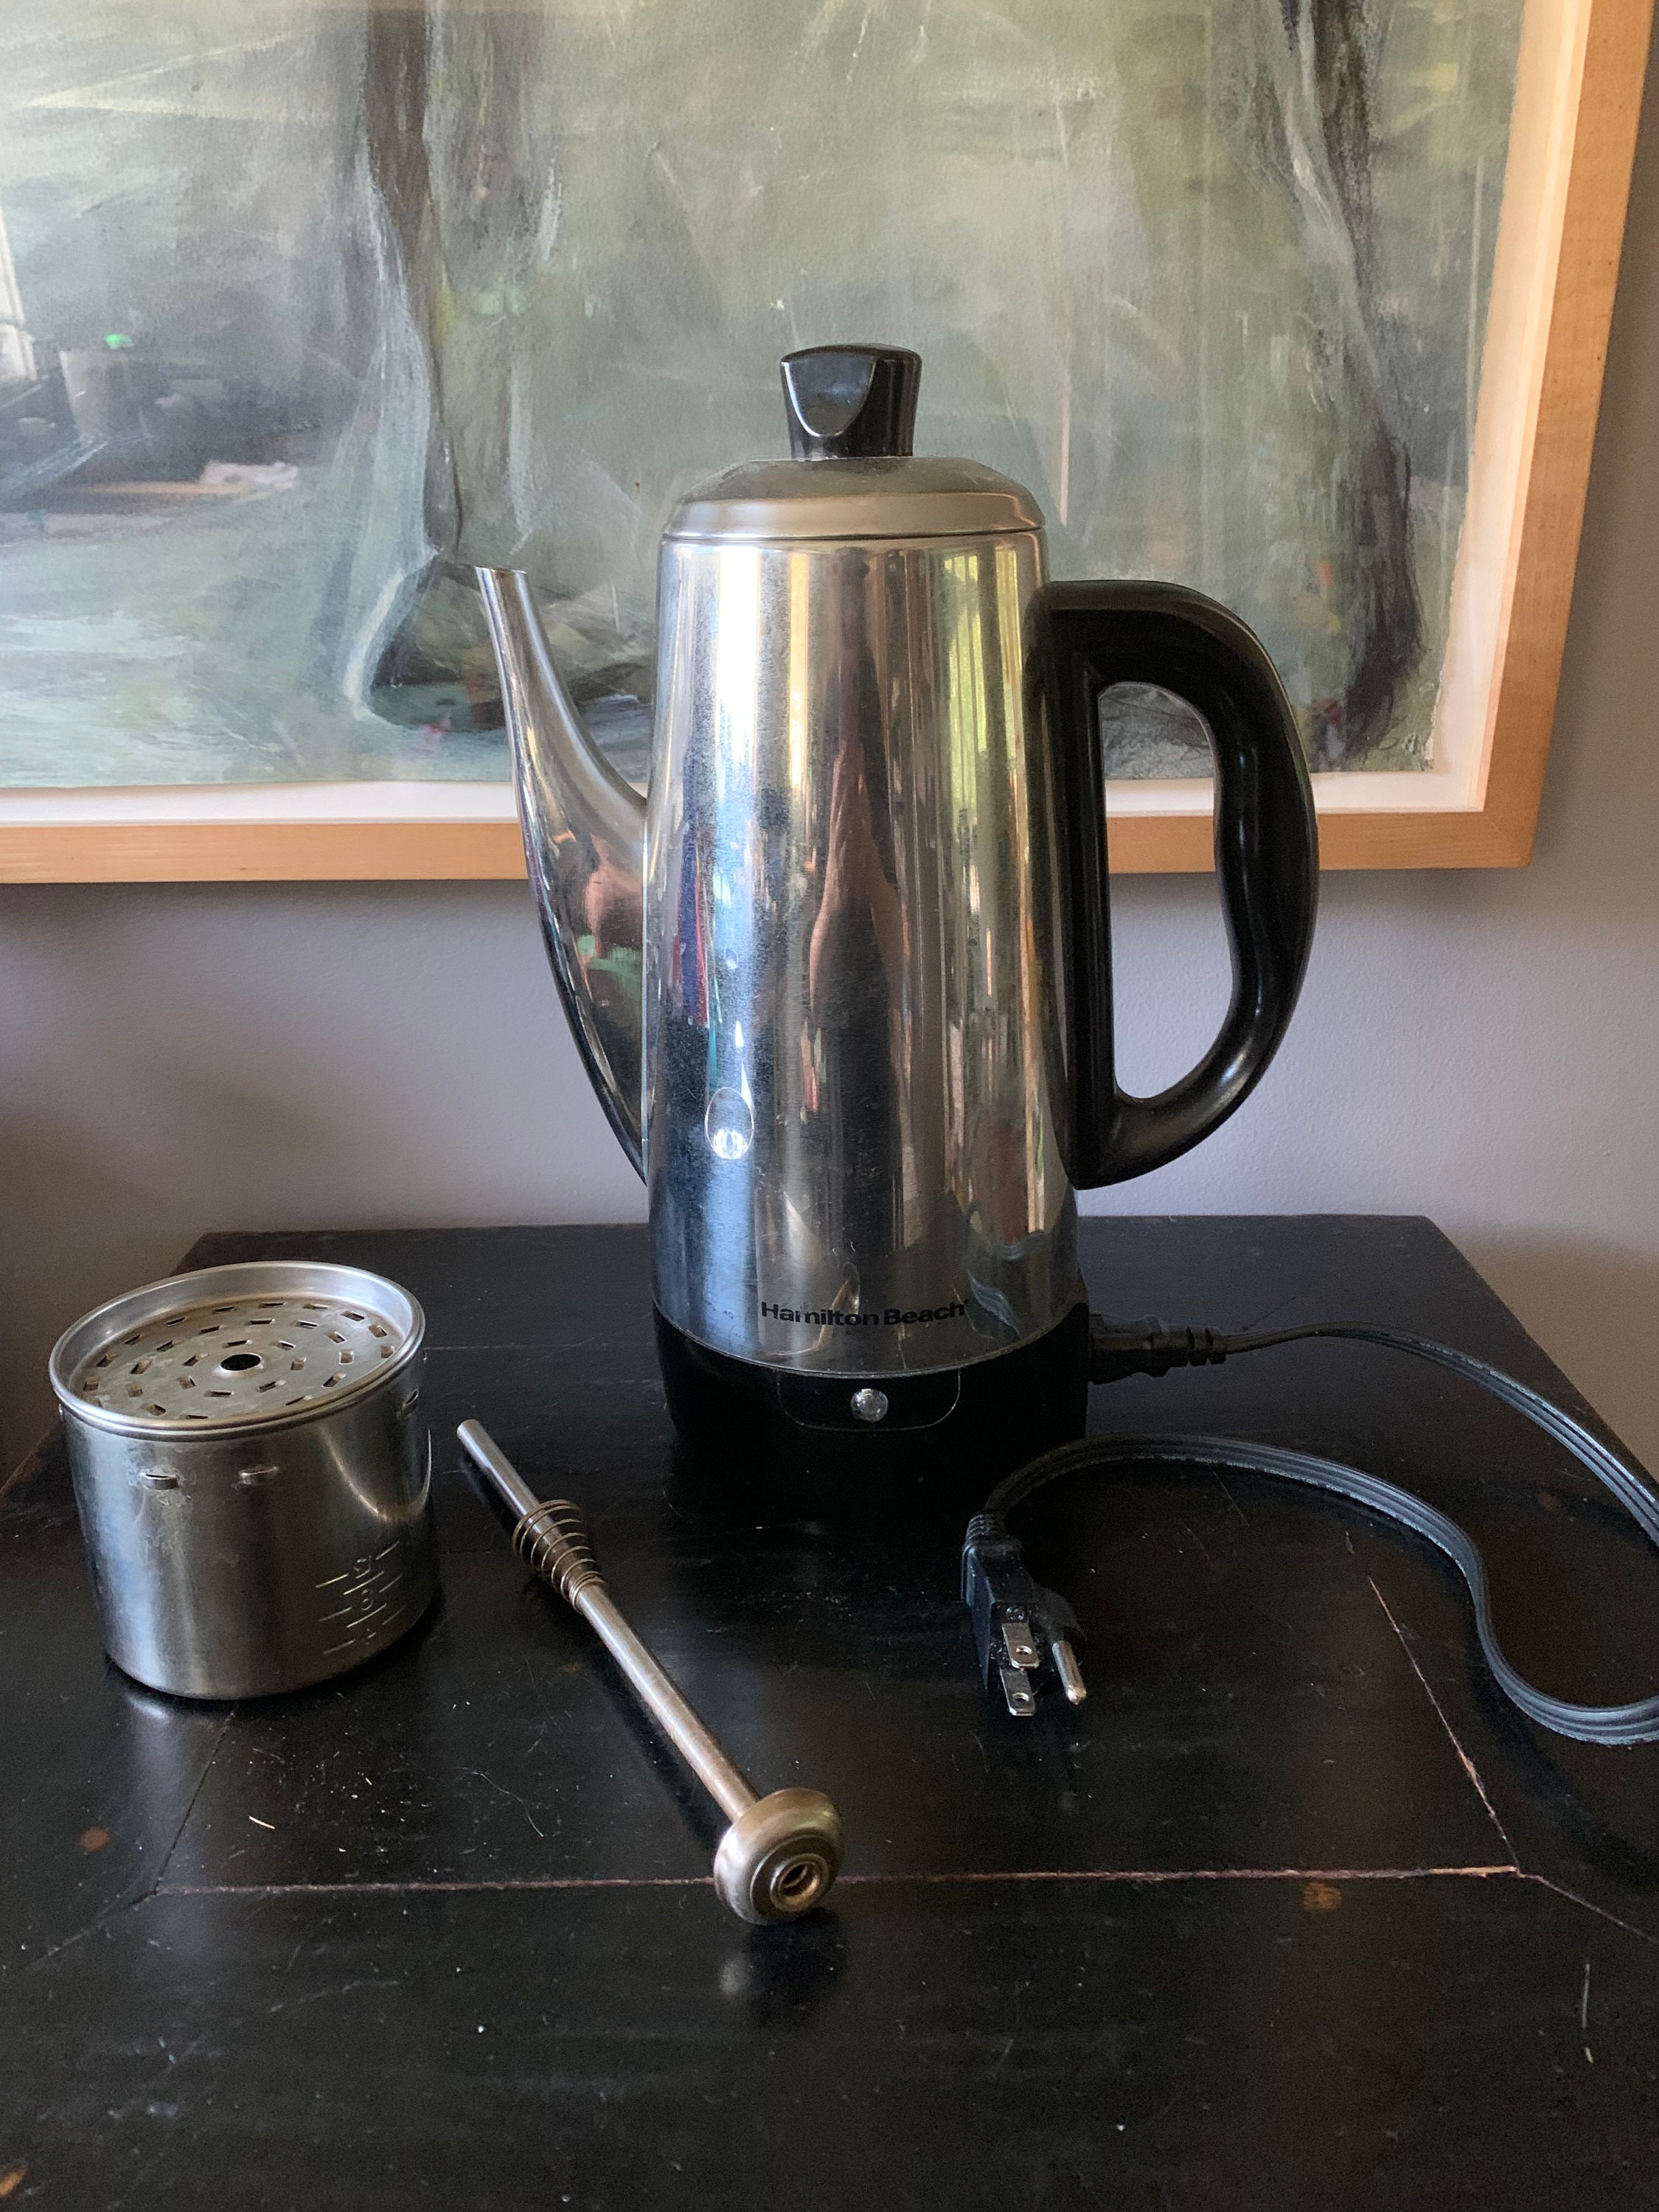 VINTAGE WESTINGHOUSE AUTOMATIC ELECTRIC PERCOLATOR 10 CUP COFFEE